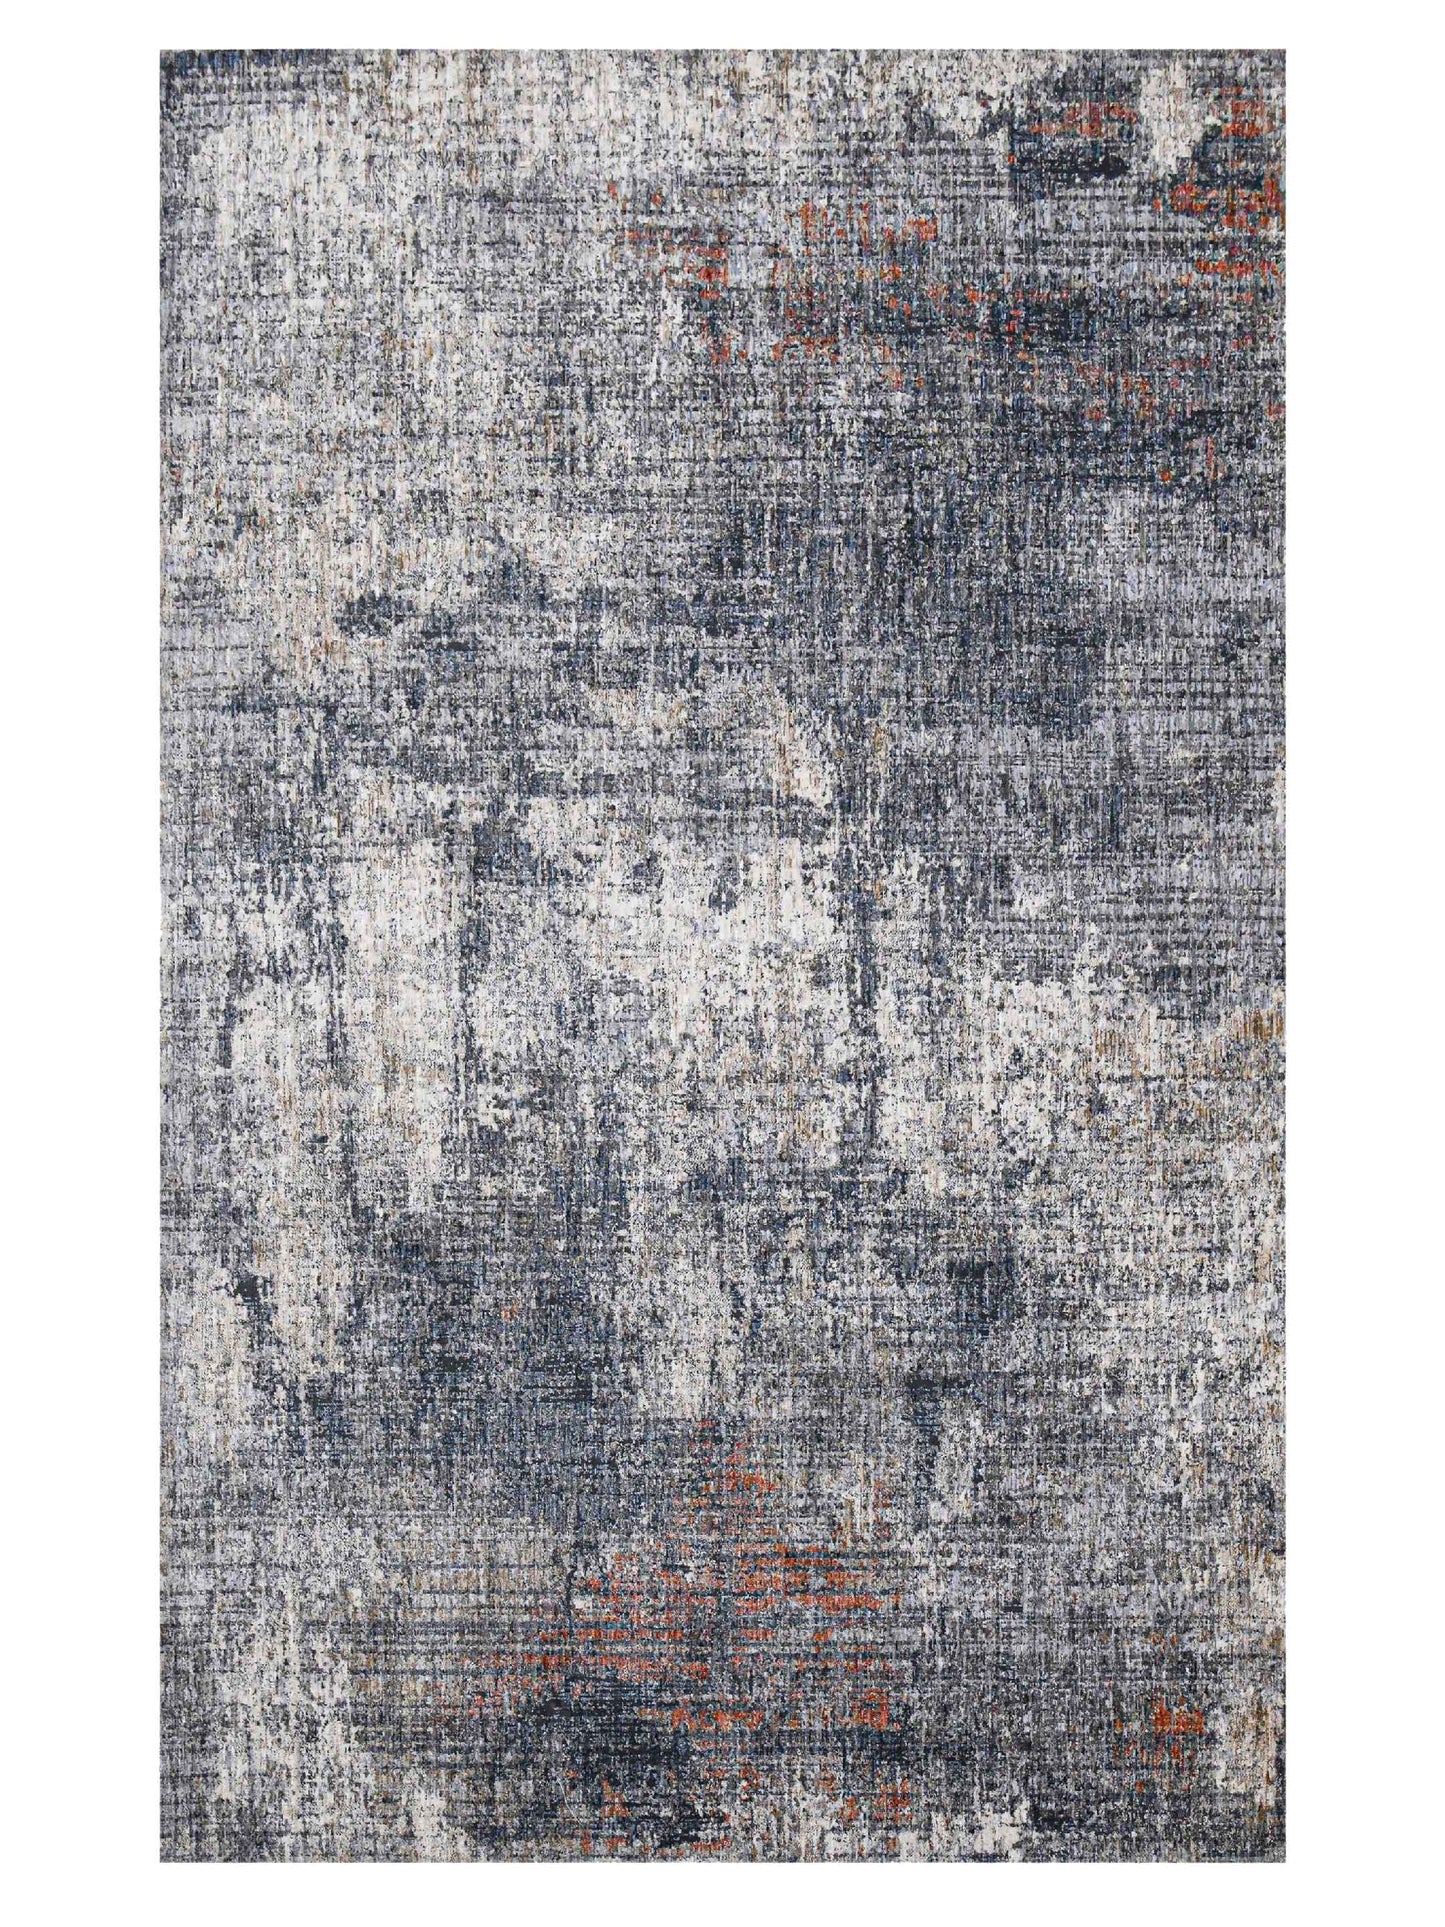 Limited Westonia WES-907 GRAY Transitional Machinemade Rug